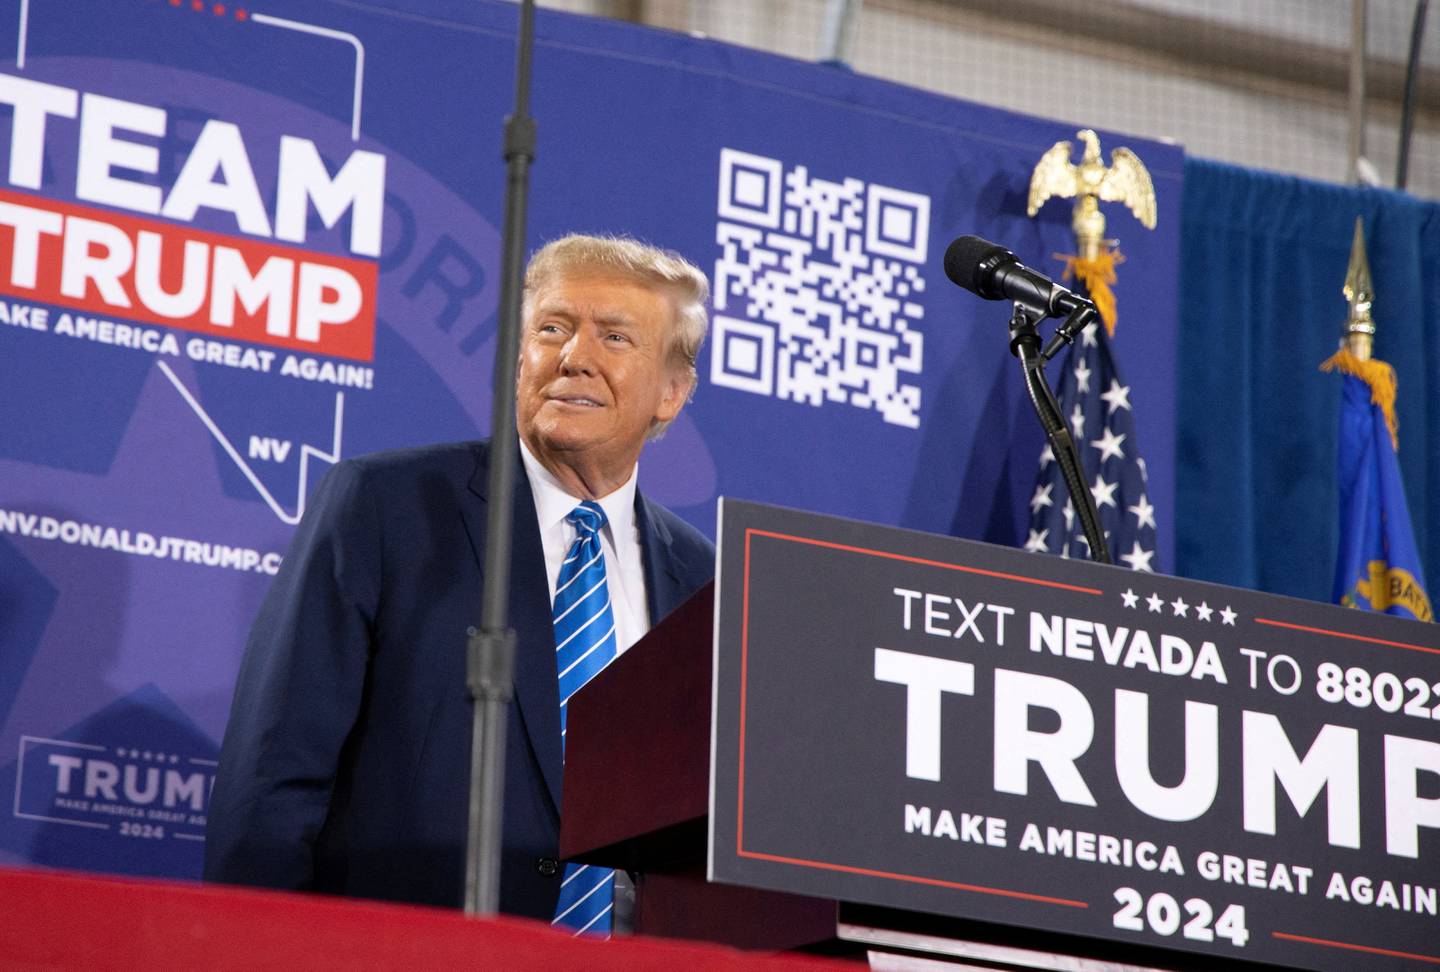 FILE PHOTO: Republican presidential candidate and former U.S. President Donald Trump speaks at a campaign rally ahead of the Republican caucus in Las Vegas, Nevada, U.S. January 27, 2024. REUTERS/Ronda Churchill/File Photo